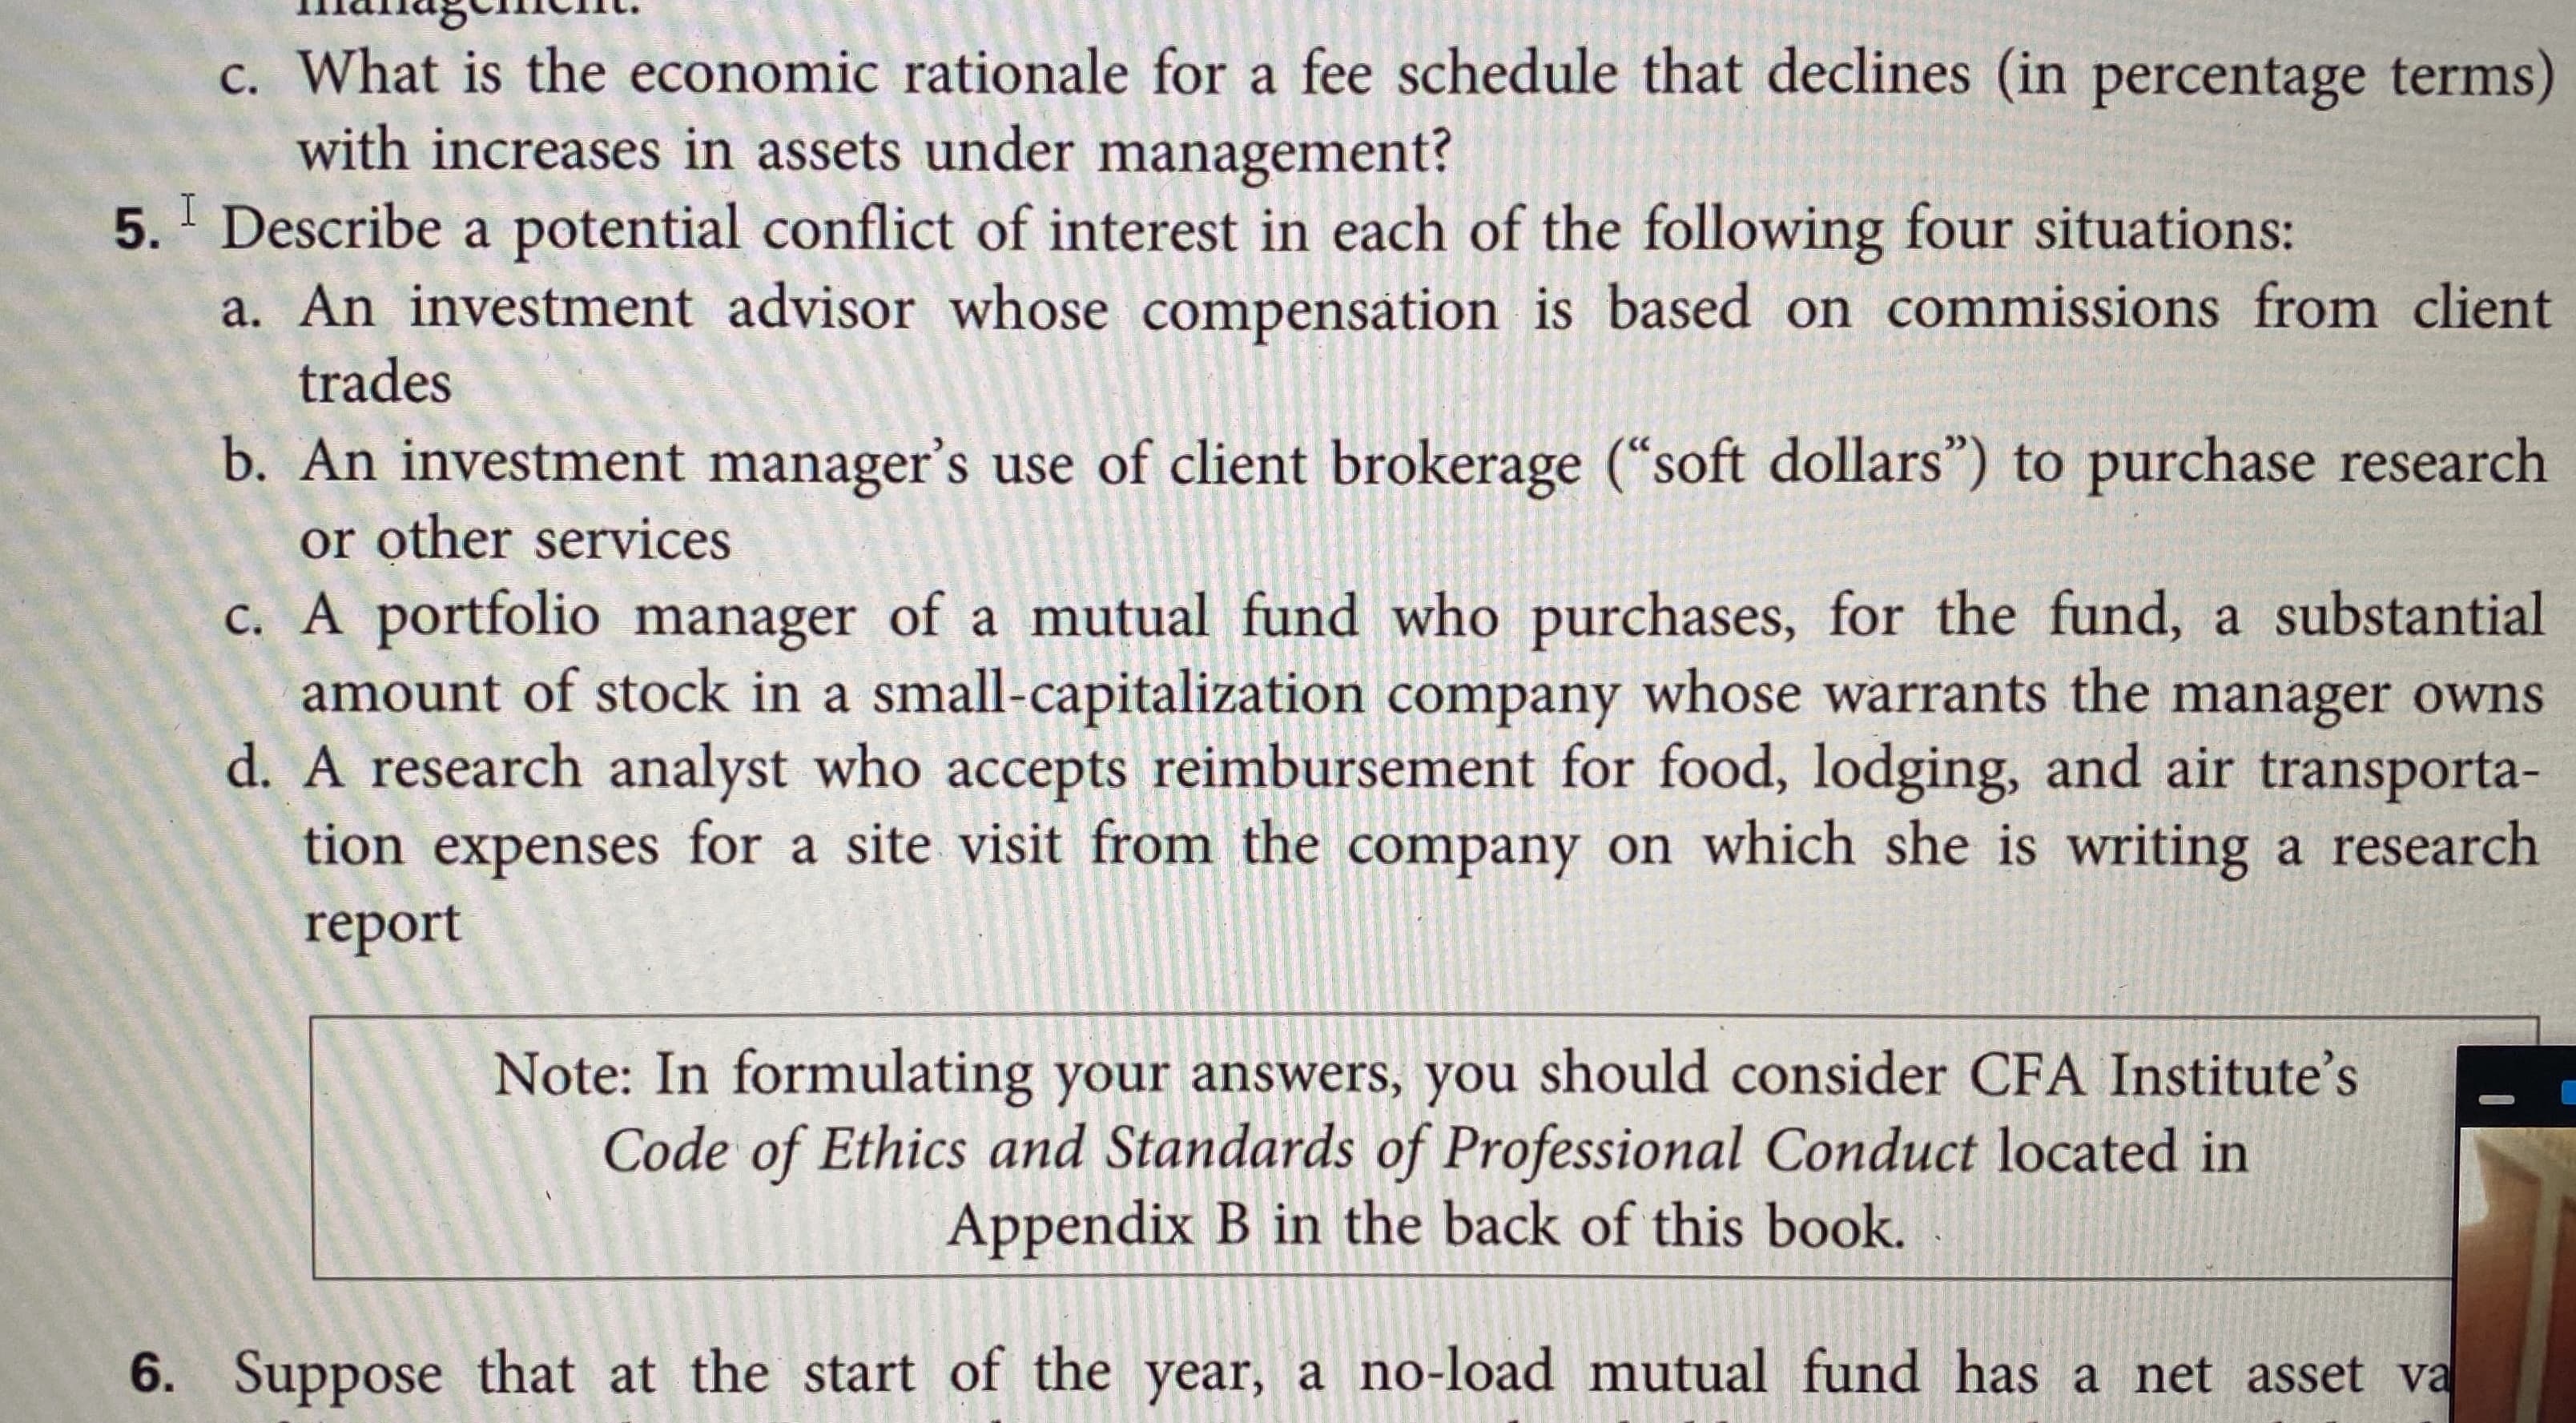 c. What is the economic rationale for a fee schedule that declines (in percentage terms)
with increases in assets under management?
5. Describe a potential conflict of interest in each of the following four situations:
a. An investment advisor whose compensátion is based on commissions from client
trades
b. An investment manager's use of client brokerage (“soft dollars") to purchase research
or other services
c. A portfolio manager of a mutual fund who purchases, for the fund, a substantial
amount of stock in a small-capitalization company whose warrants the manager owns
d. A research analyst who accepts reimbursement for food, lodging, and air transporta-
tion expenses for a site visit from the company on which she is writing a research
report
Note: In formulating your answers, you should consider CFA Institute's
Code of Ethics and Standards of Professional Conduct located in
Appendix B in the back of this book.
6. Suppose that at the start of the year, a no-load mutual fund has a net asset va
